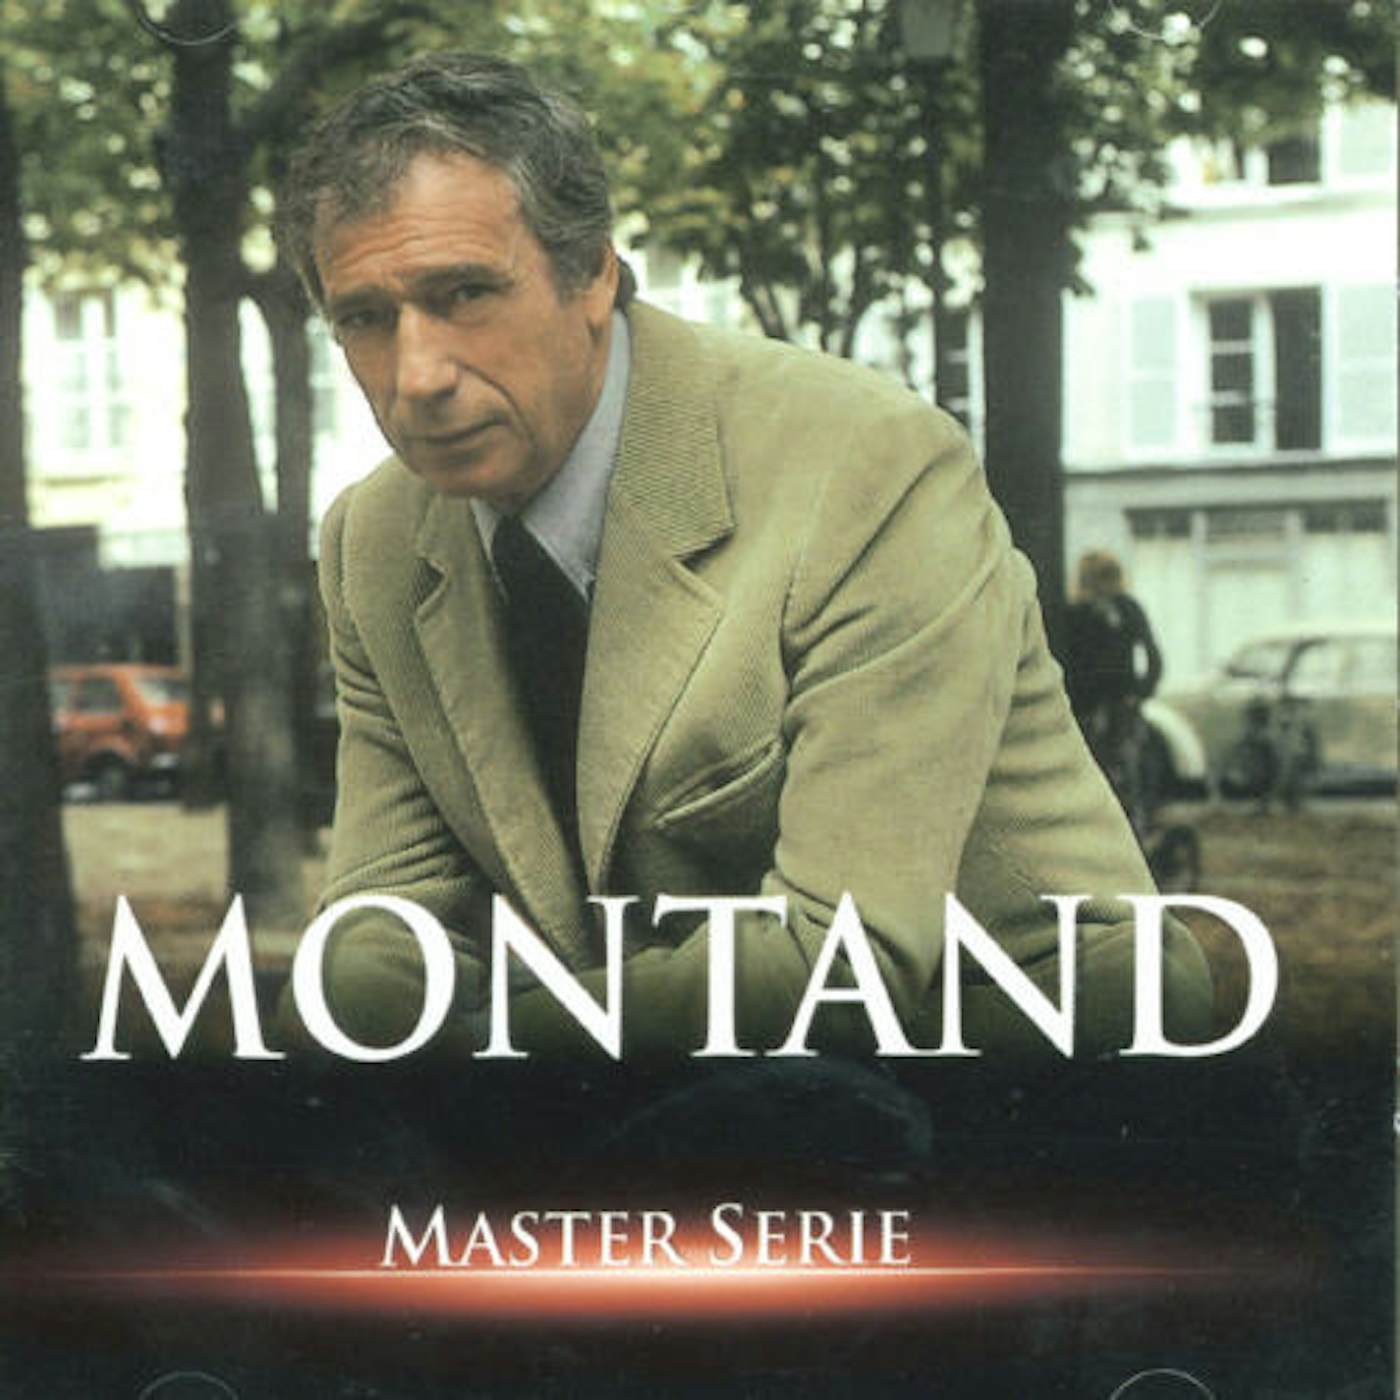 Yves Montand MASTER SERIES CD